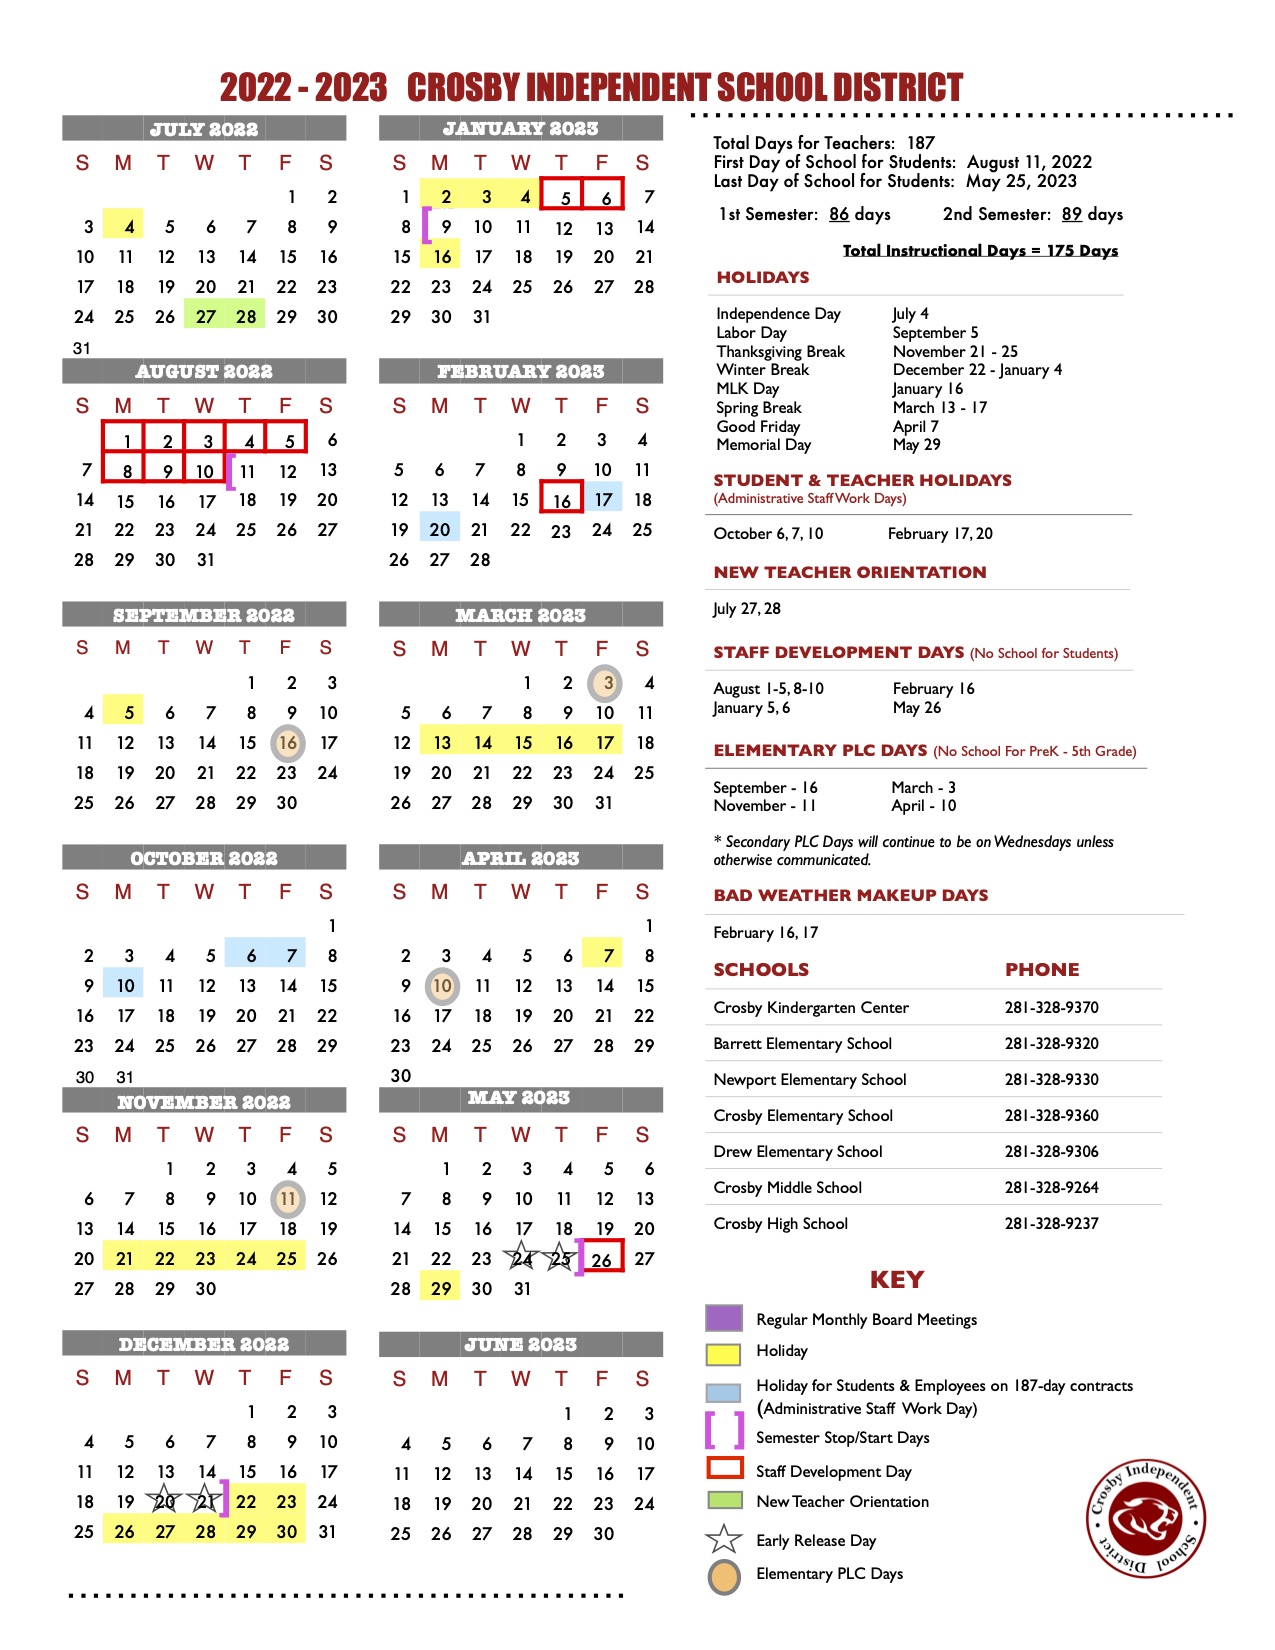 crosby-independent-school-district-calendar-2024-2025-mycollegepoints